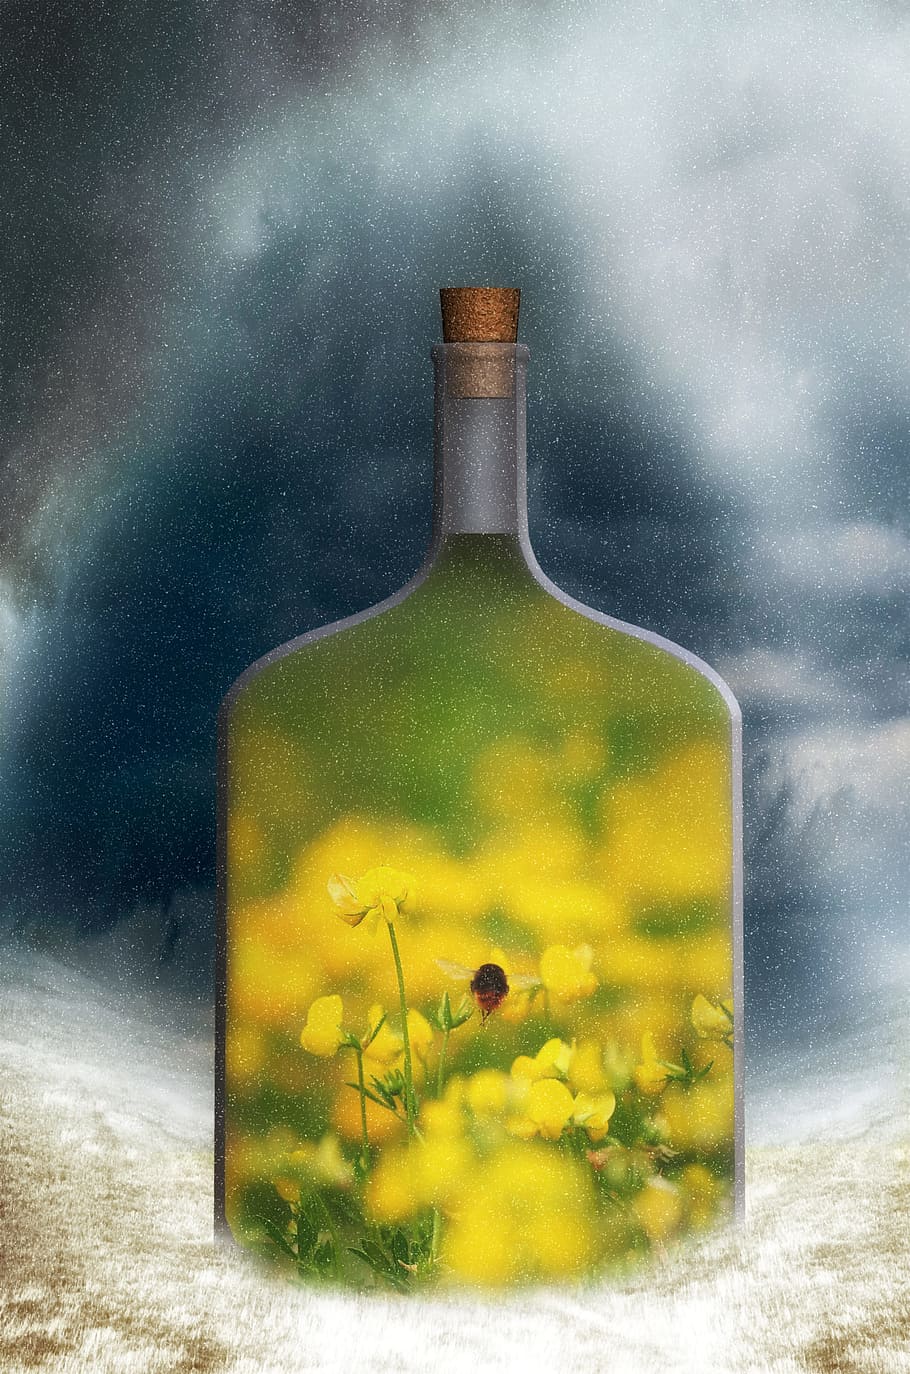 HD wallpaper: yellow petaled flower and bottle painting, fantasy